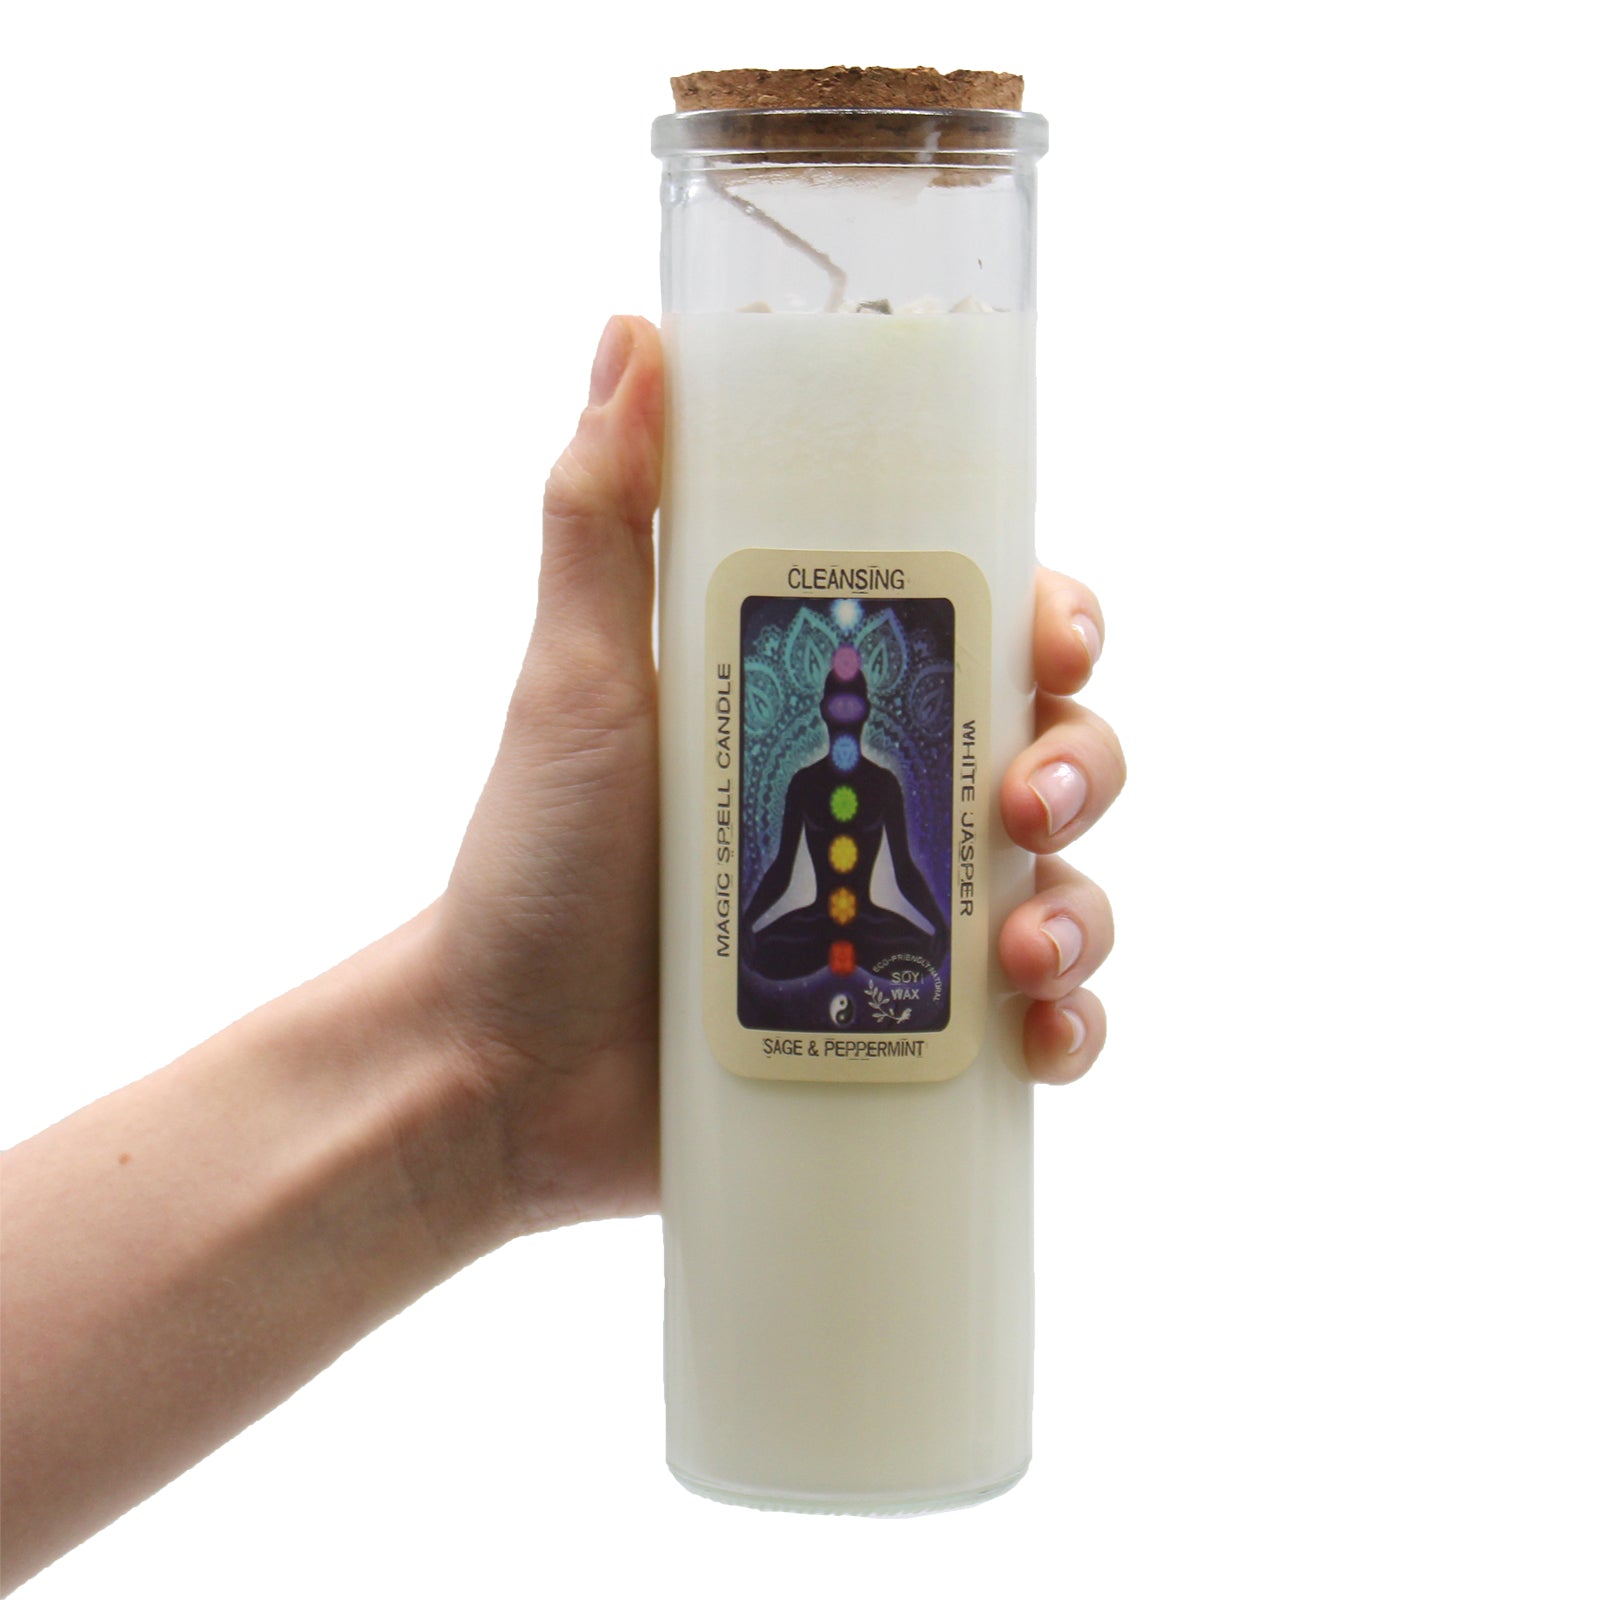 Magic Spell Candle - Cleansing